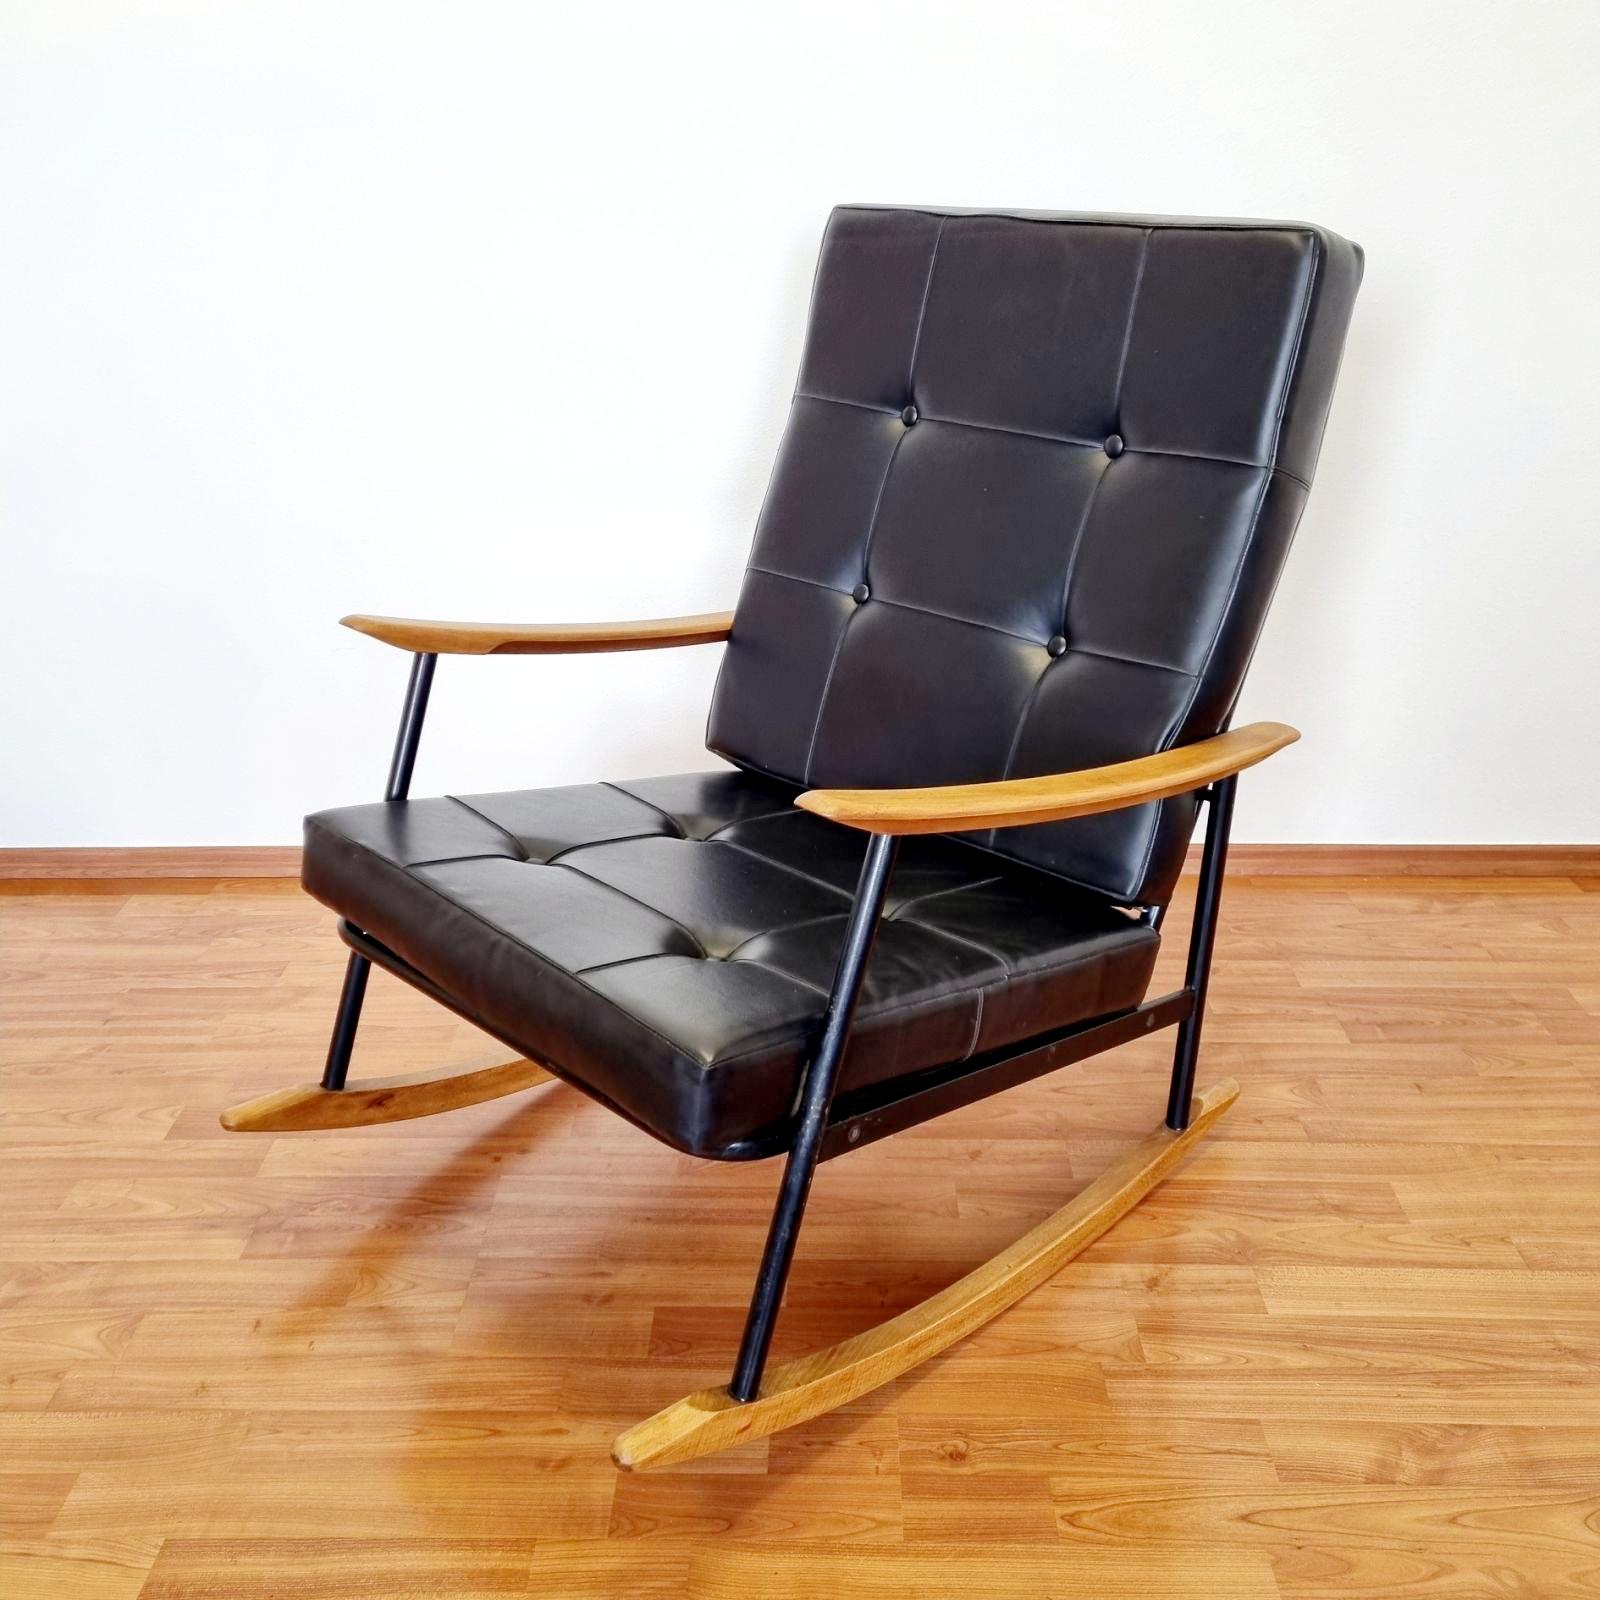 Rocking chair from the 60s era, designed by Gastone Rinaldi.
Made of metal, wood and faux leather. The leather is perfectly preserved, the metal parts show some signs of use and age. Overall in almost perfect vintage condition.